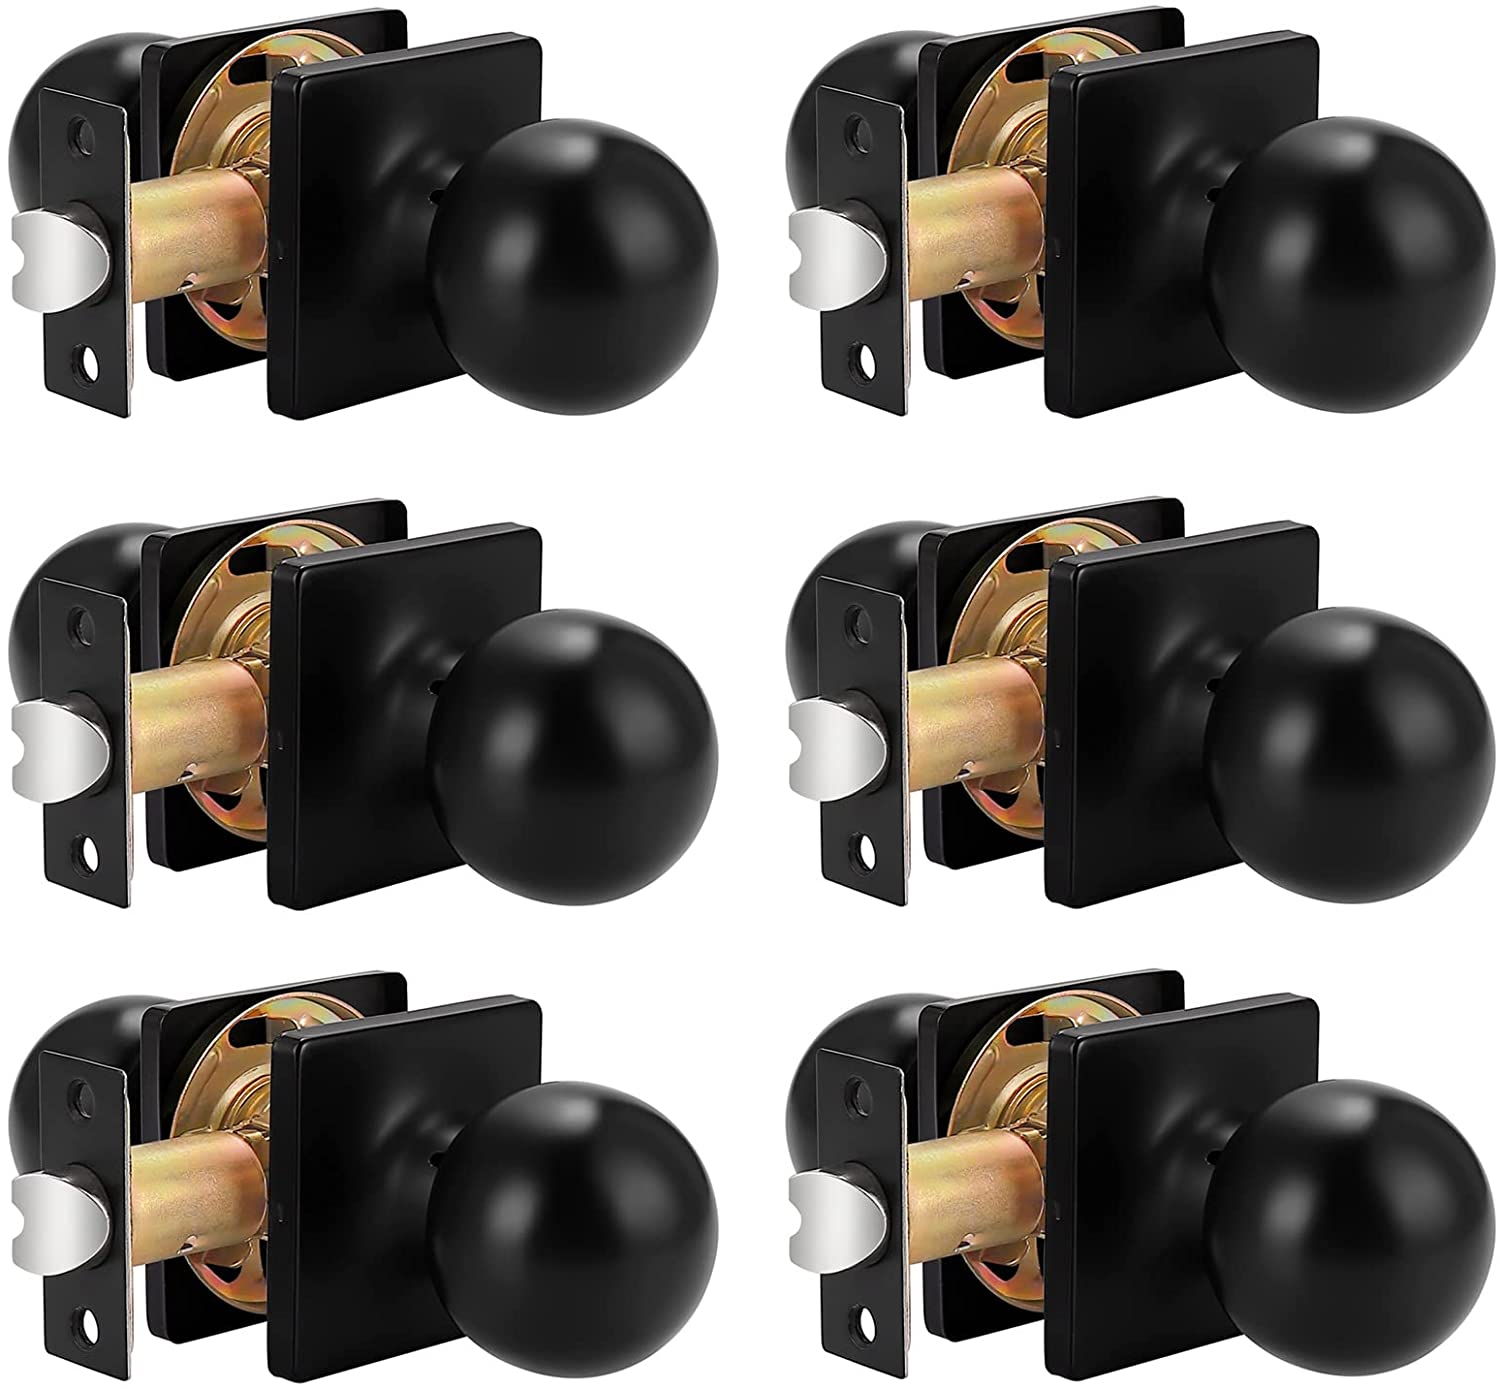 Probrico Ball Knob with Rosette Interior Privacy Door Knobs Black Finish 6 Packs